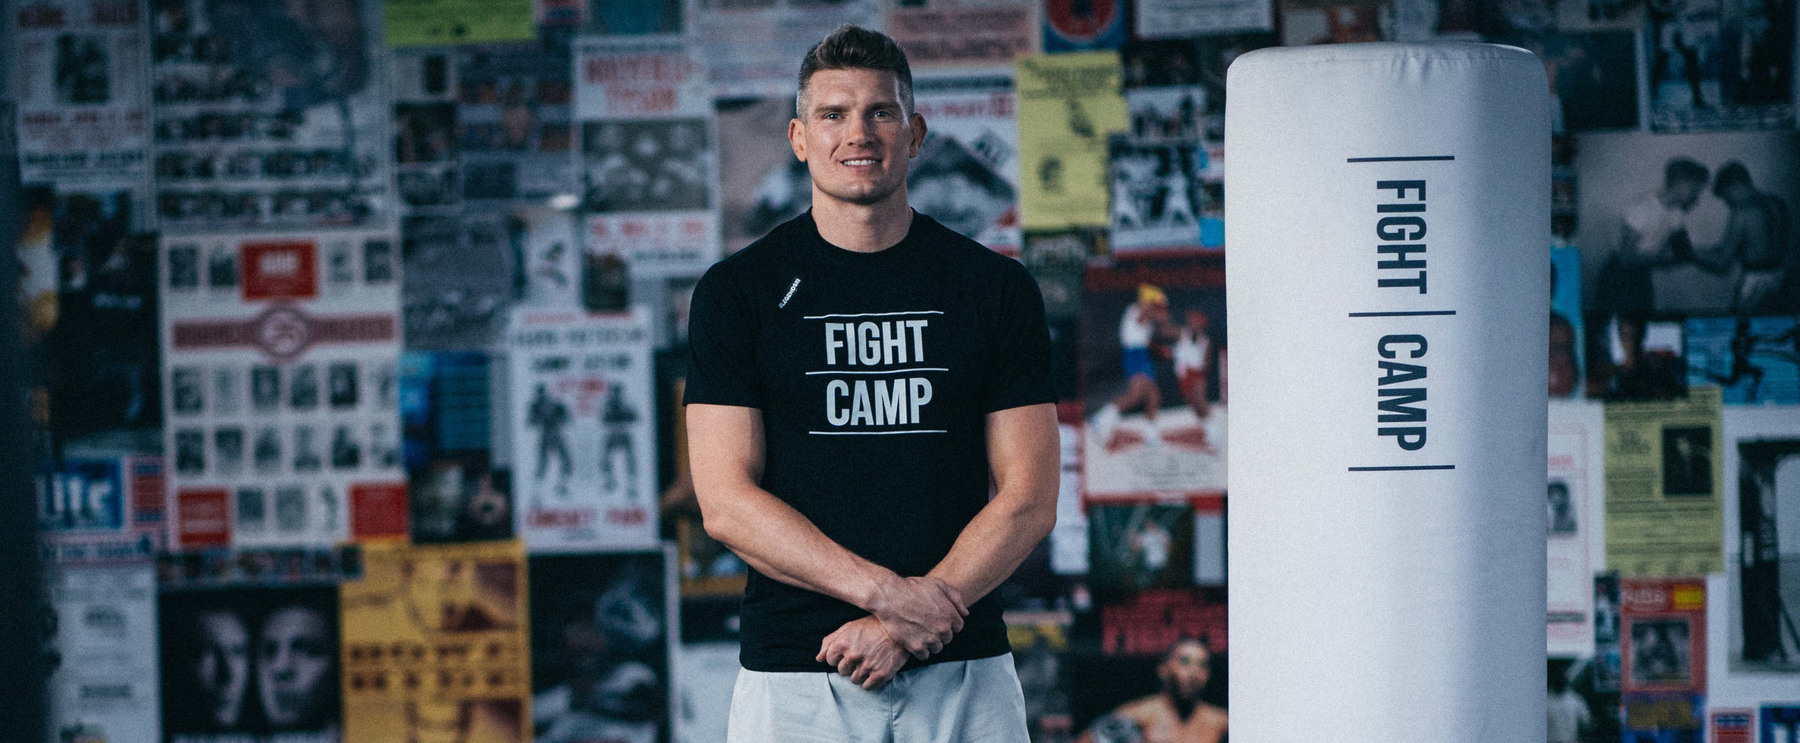 FightCamp App Series - Adapted Fight Camp with Stephen Wonderboy Thompson